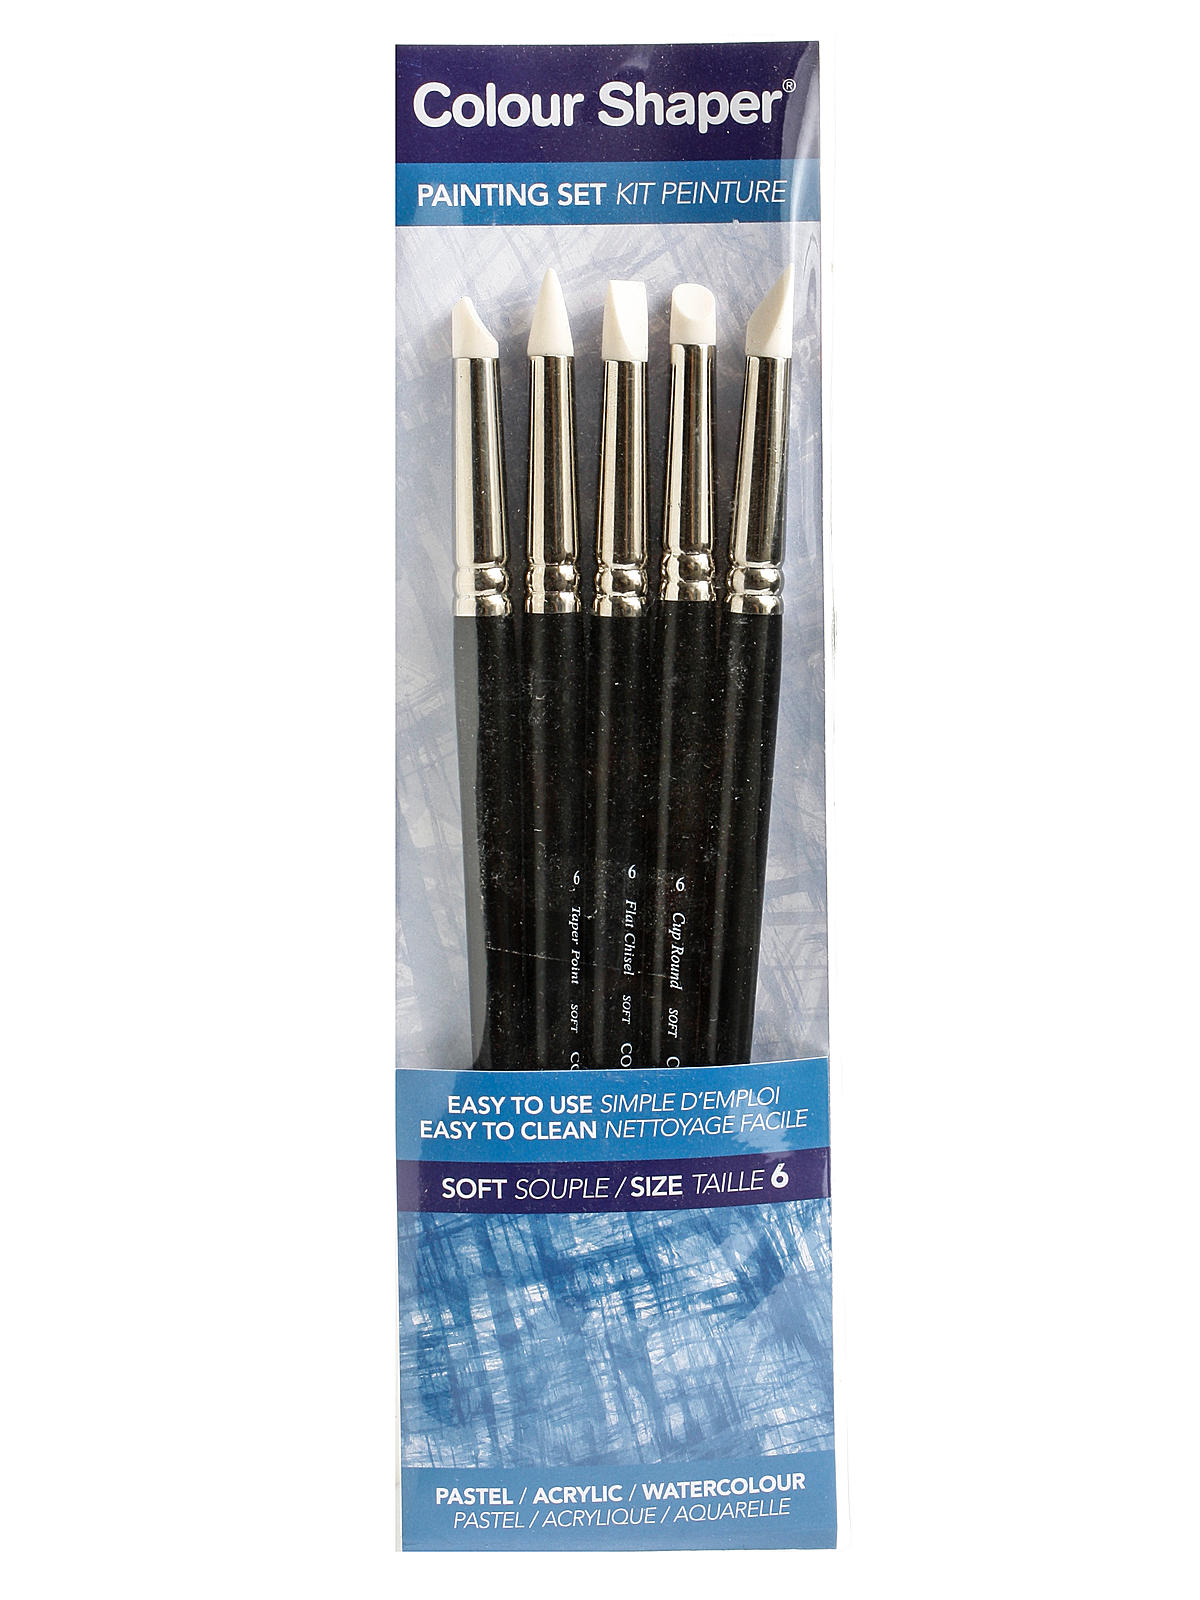 Painting Tool And Pastel Blending Sets Assorted Soft No. 6 Set Of 5